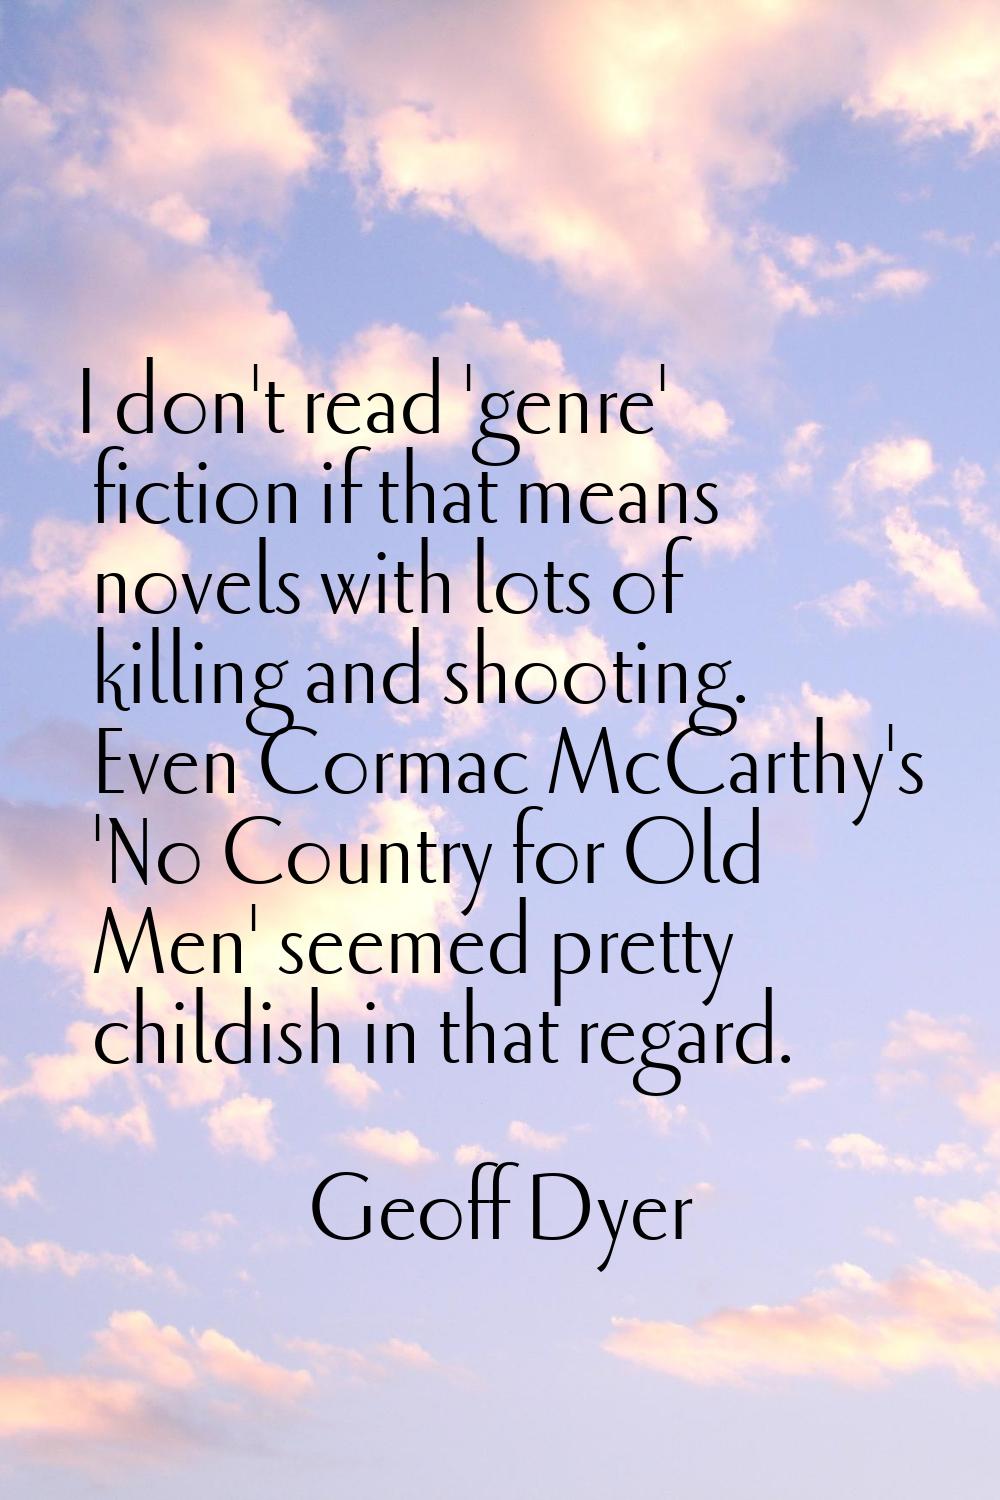 I don't read 'genre' fiction if that means novels with lots of killing and shooting. Even Cormac Mc